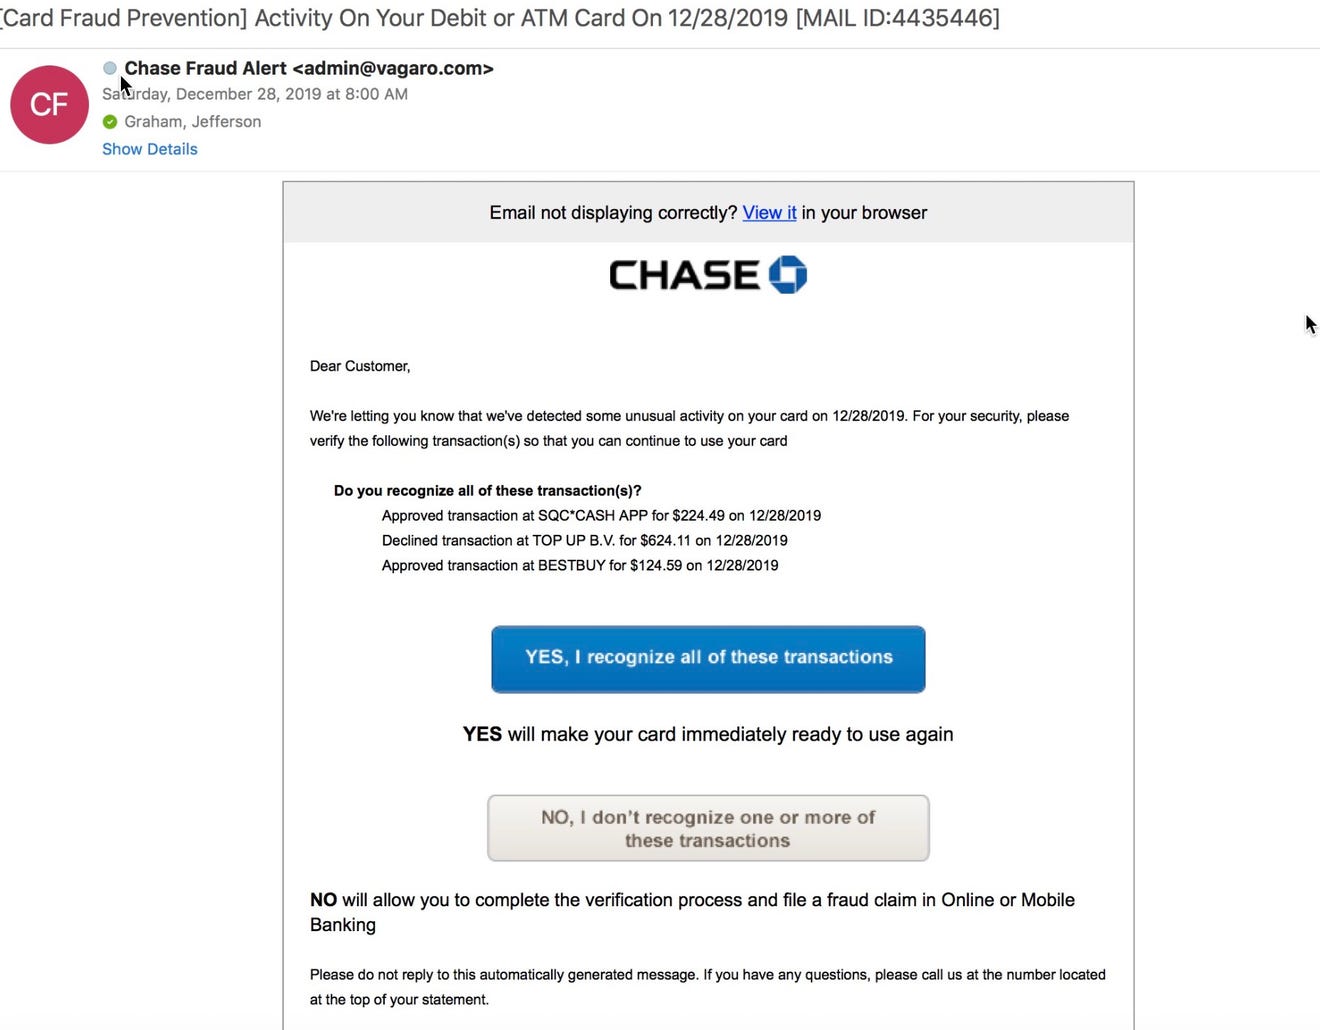 Take a good look at a phishing e-mail from a hacker